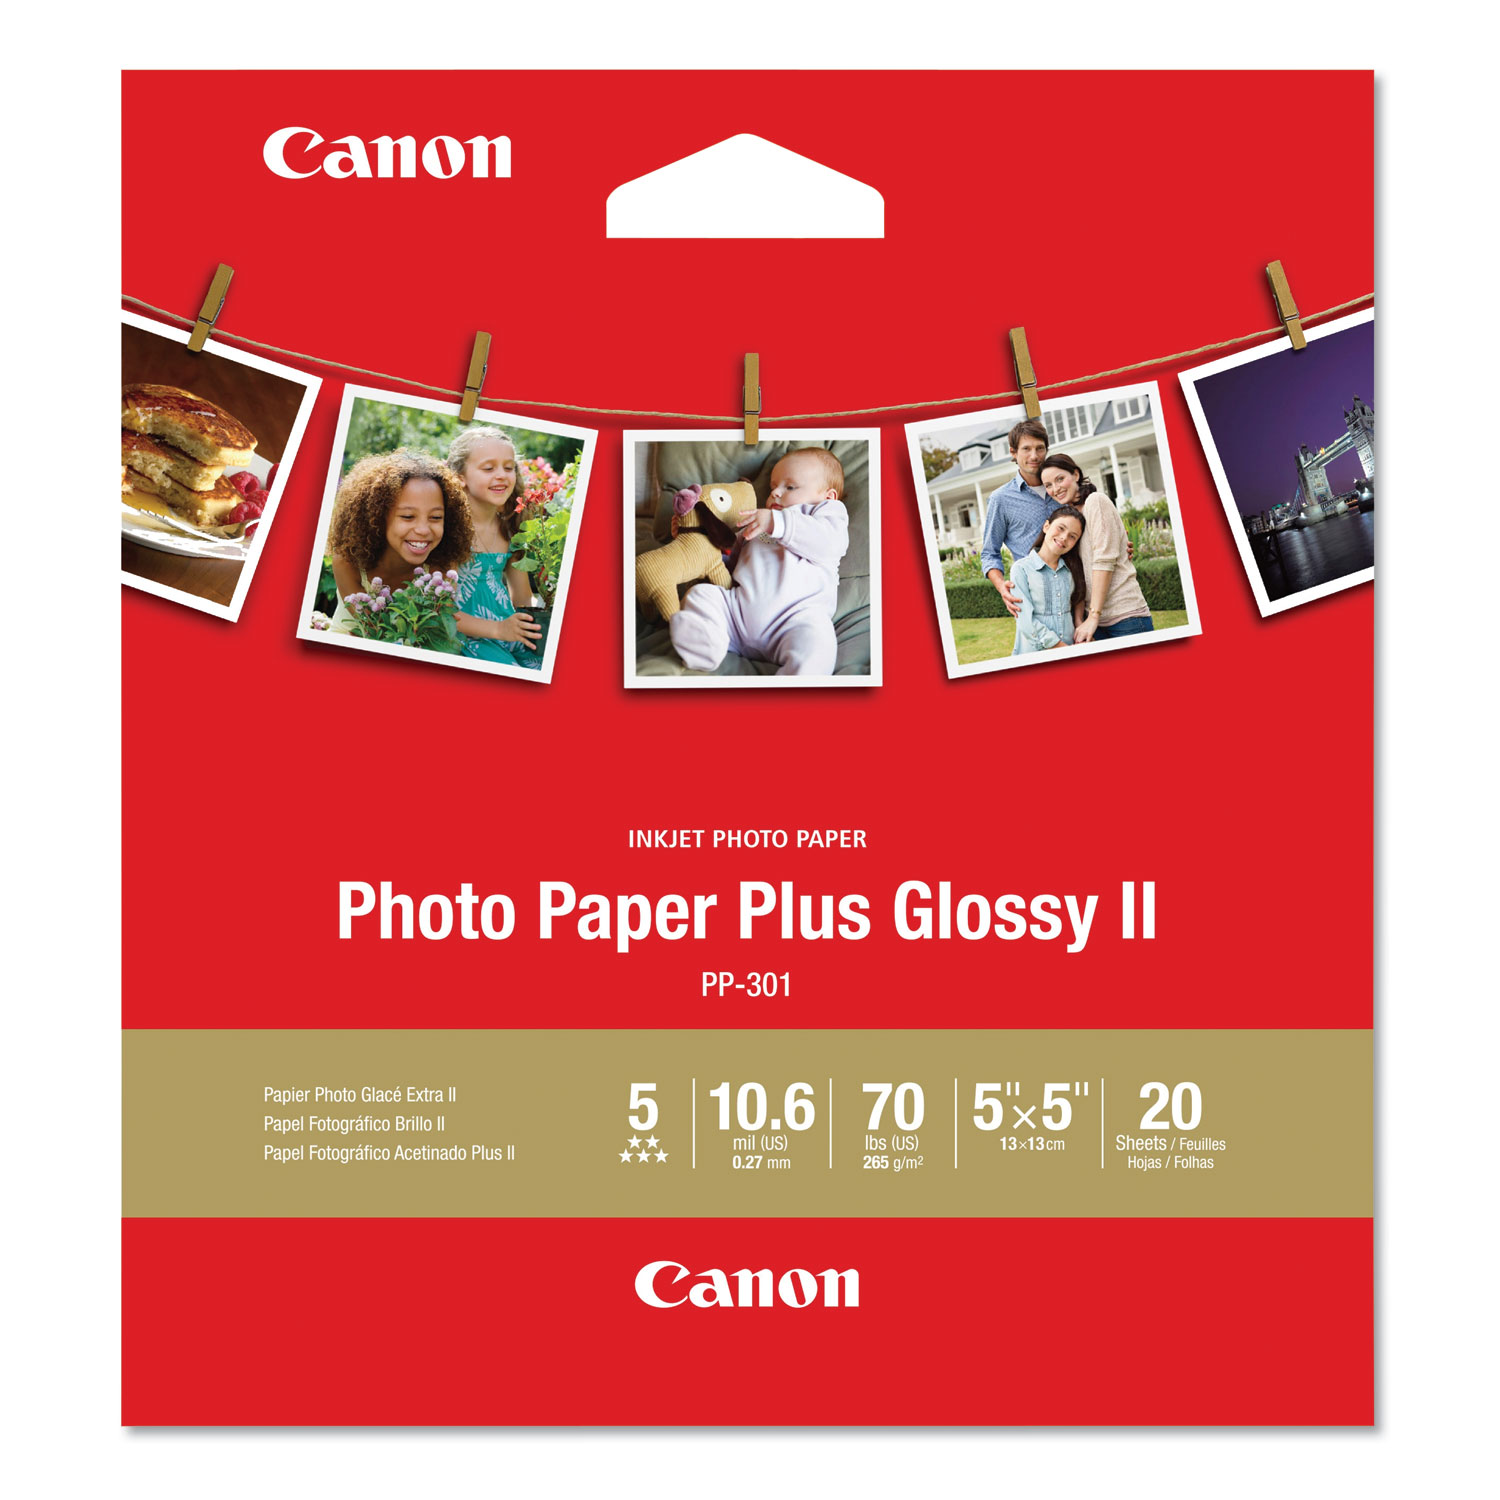  Canon 1432C012 Photo Paper Plus Glossy II, 10.6 mil, 5 x 5, White, 20 Sheets/Pack (CNM1432C012) 